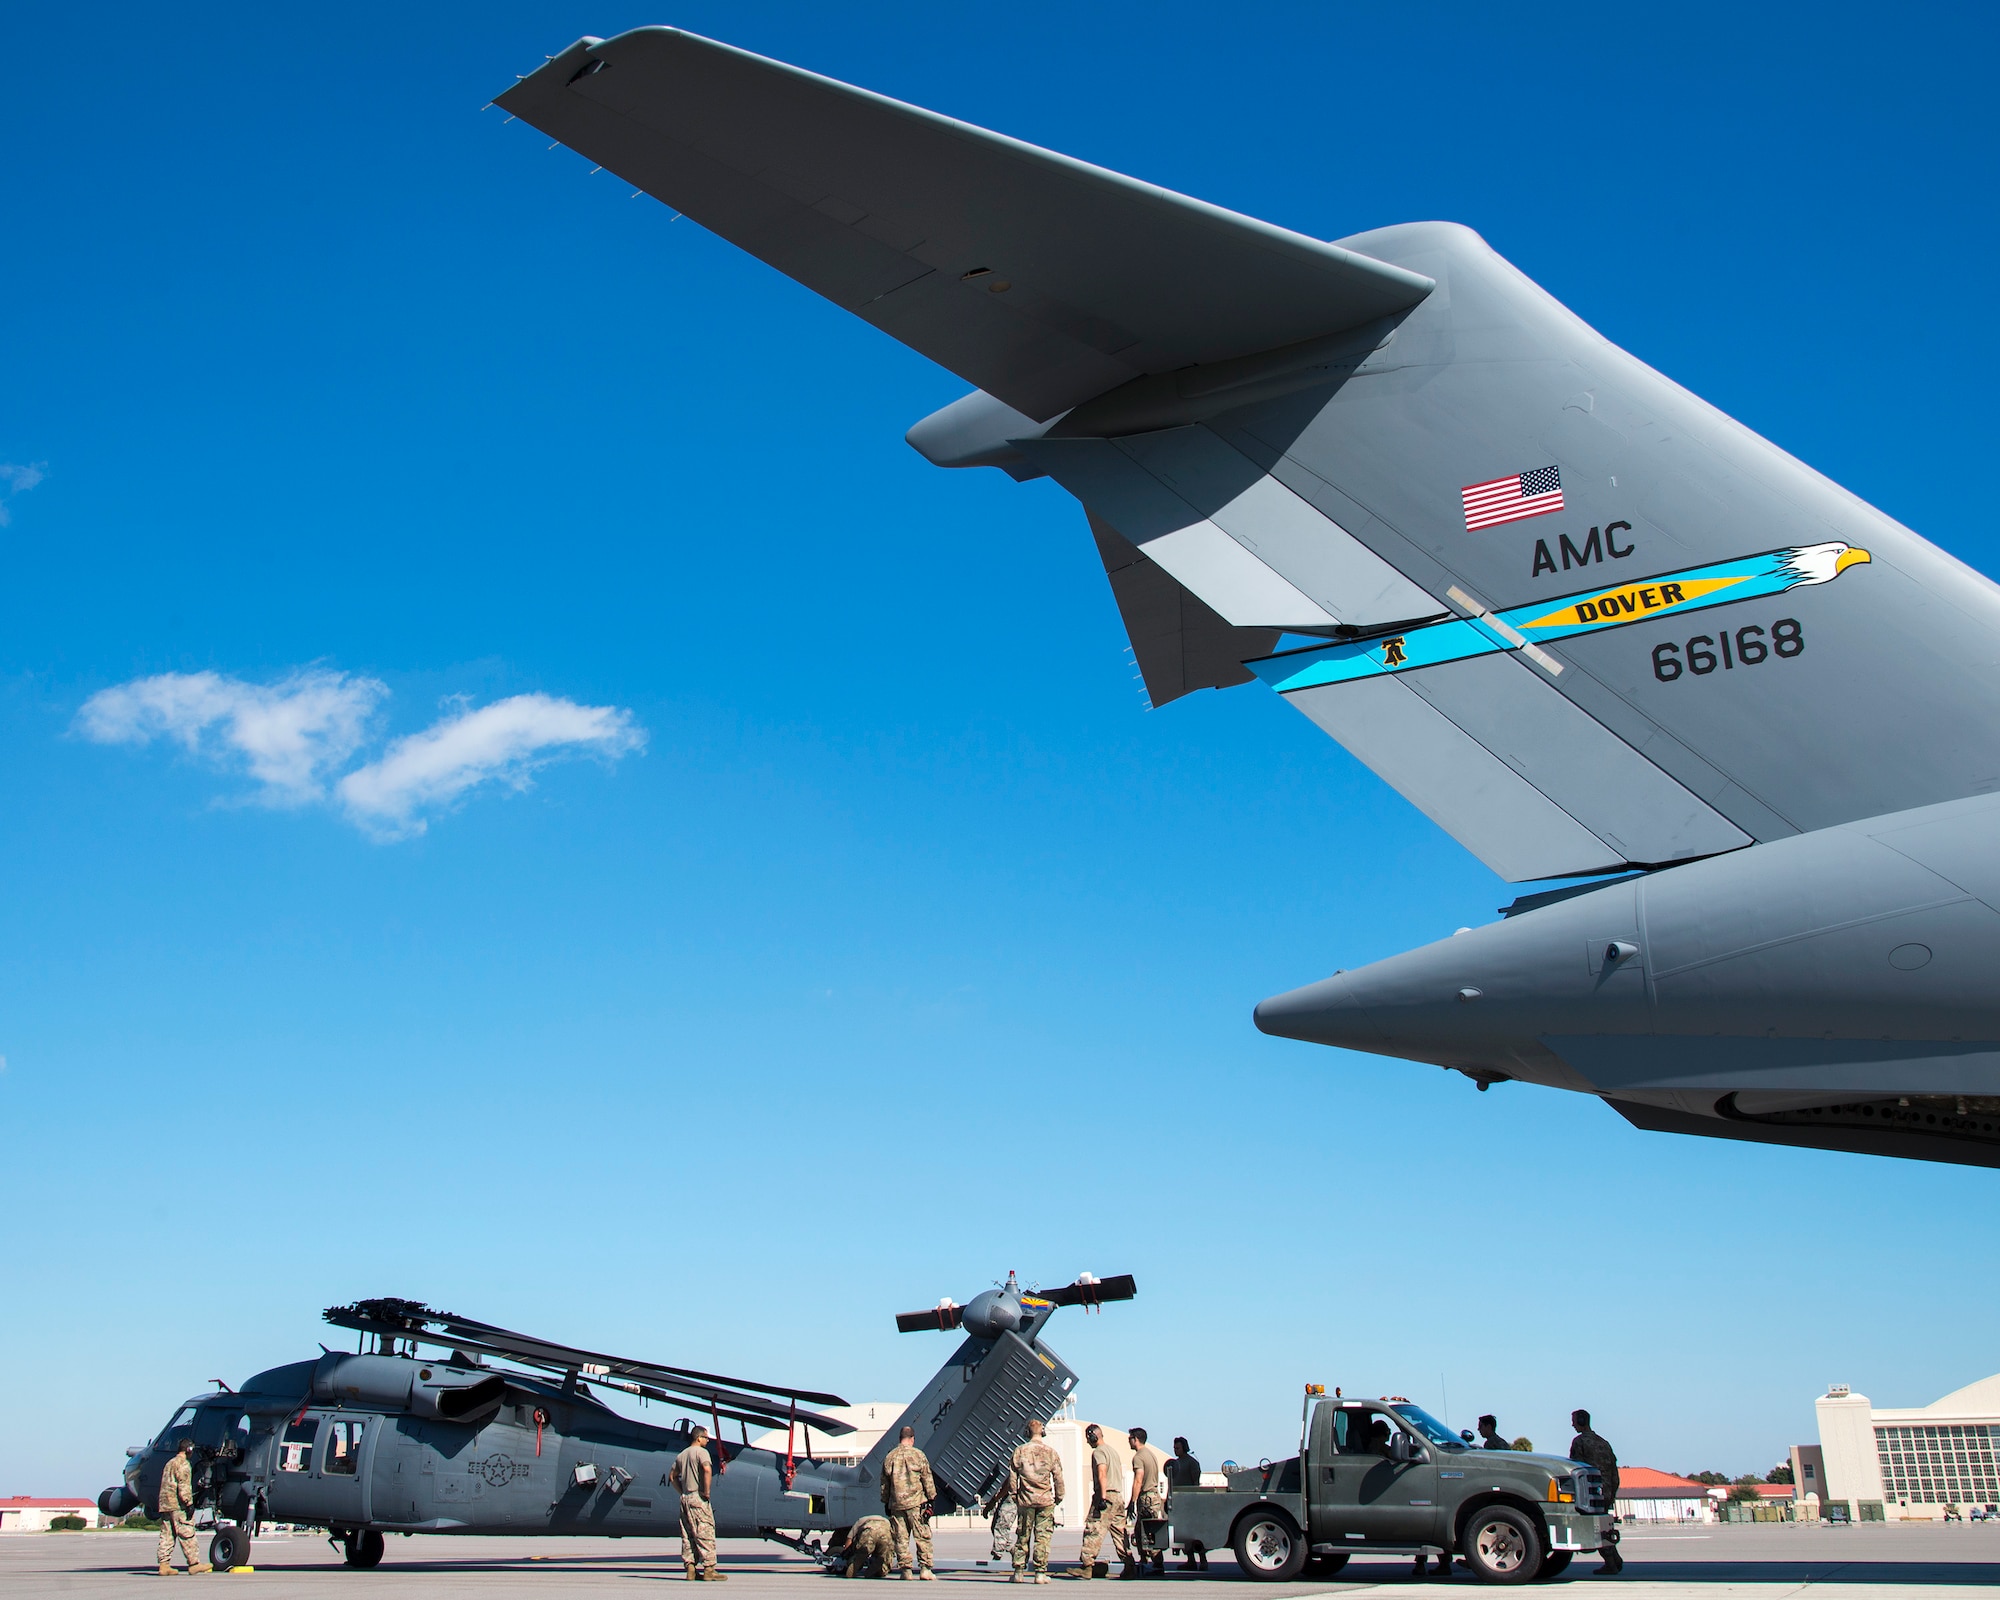 U.S. Air Force Airmen upload an HH-60 Pave Hawk helicopter assigned to the 305th Rescue Squadron (RQS), Davis-Monthan Air Force Base, Ariz., onto a C-17 Globemaster III assigned to the 436th Airlift Wing (AW), Dover Air Force Base, Dela., at MacDill Air Force Base, Fla., Nov. 20, 2019.